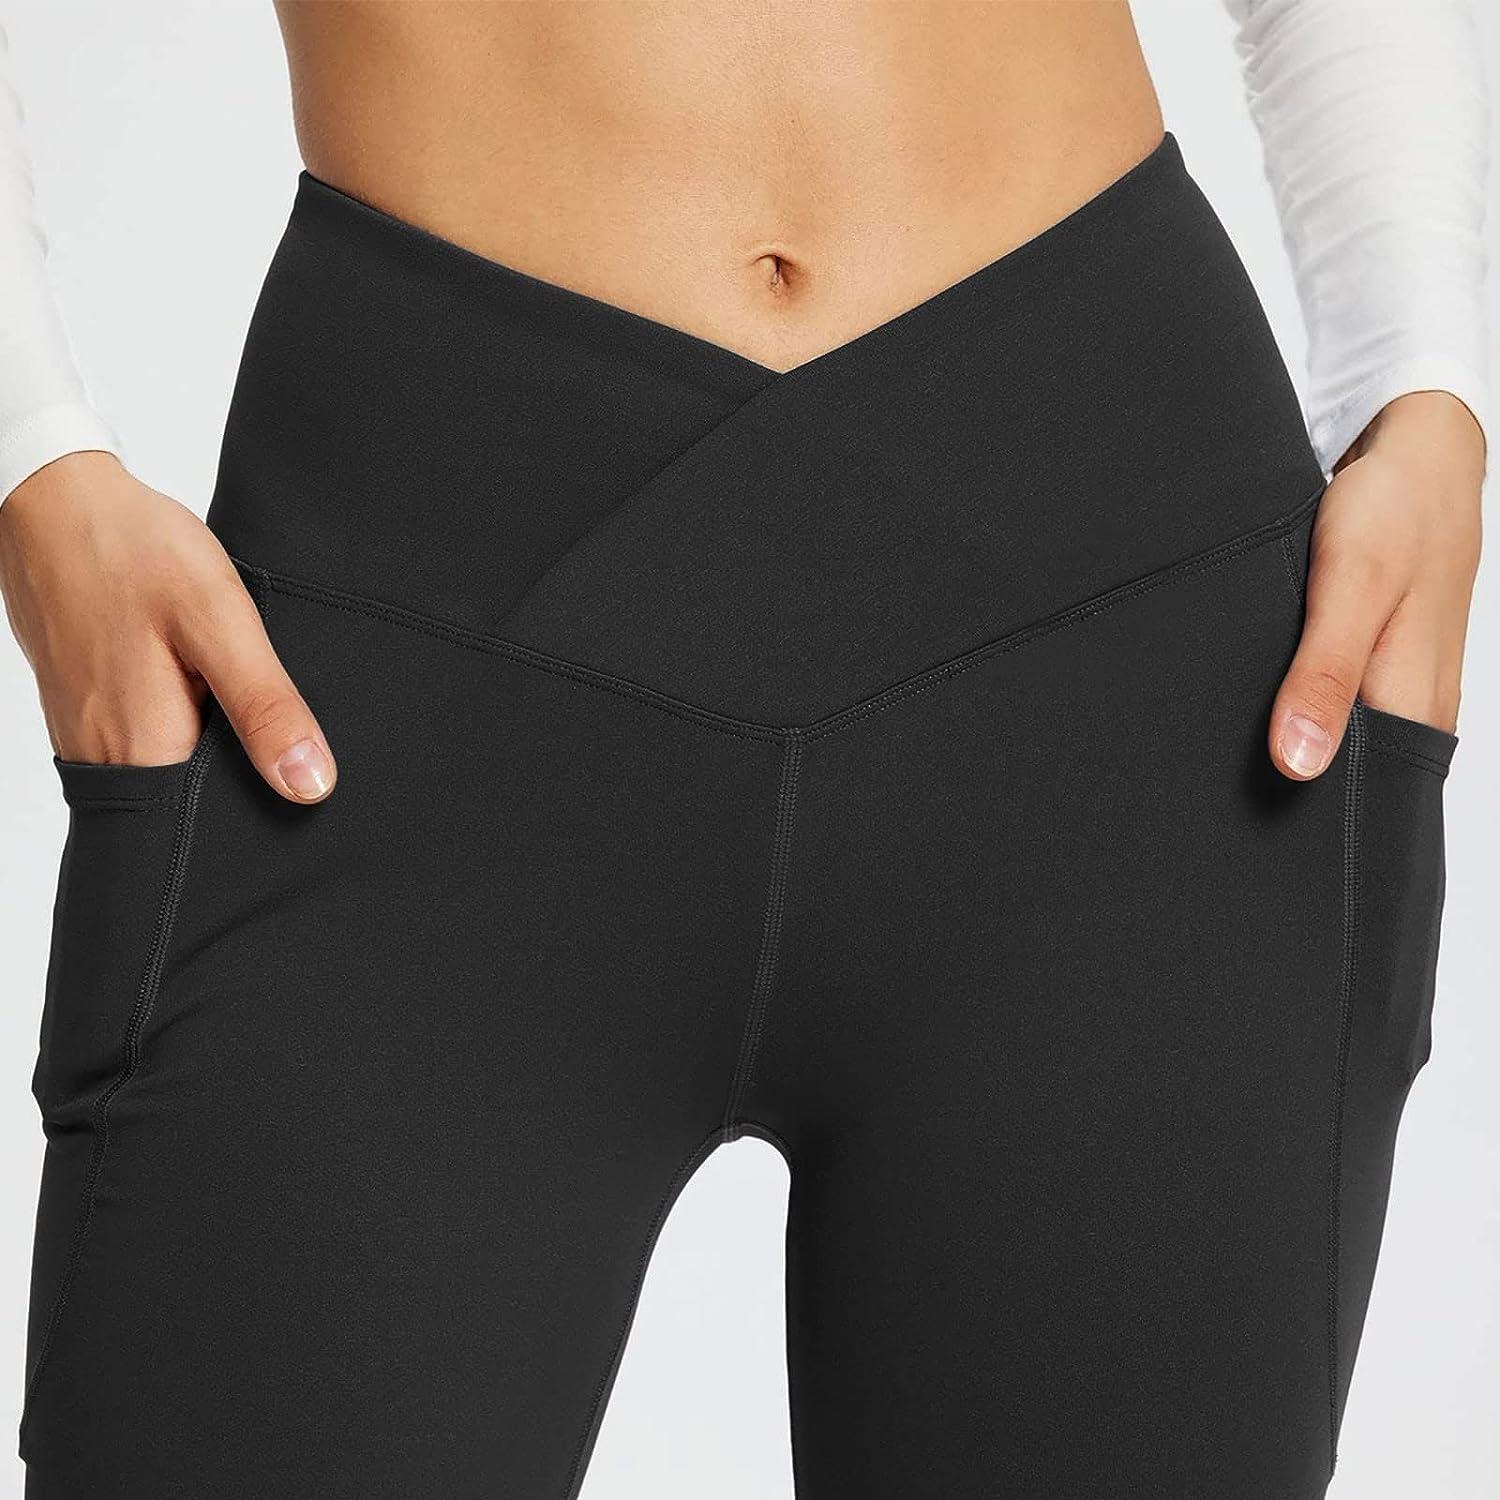 Yoga pants  Workout outfit, Yoga clothes, Flare leggings